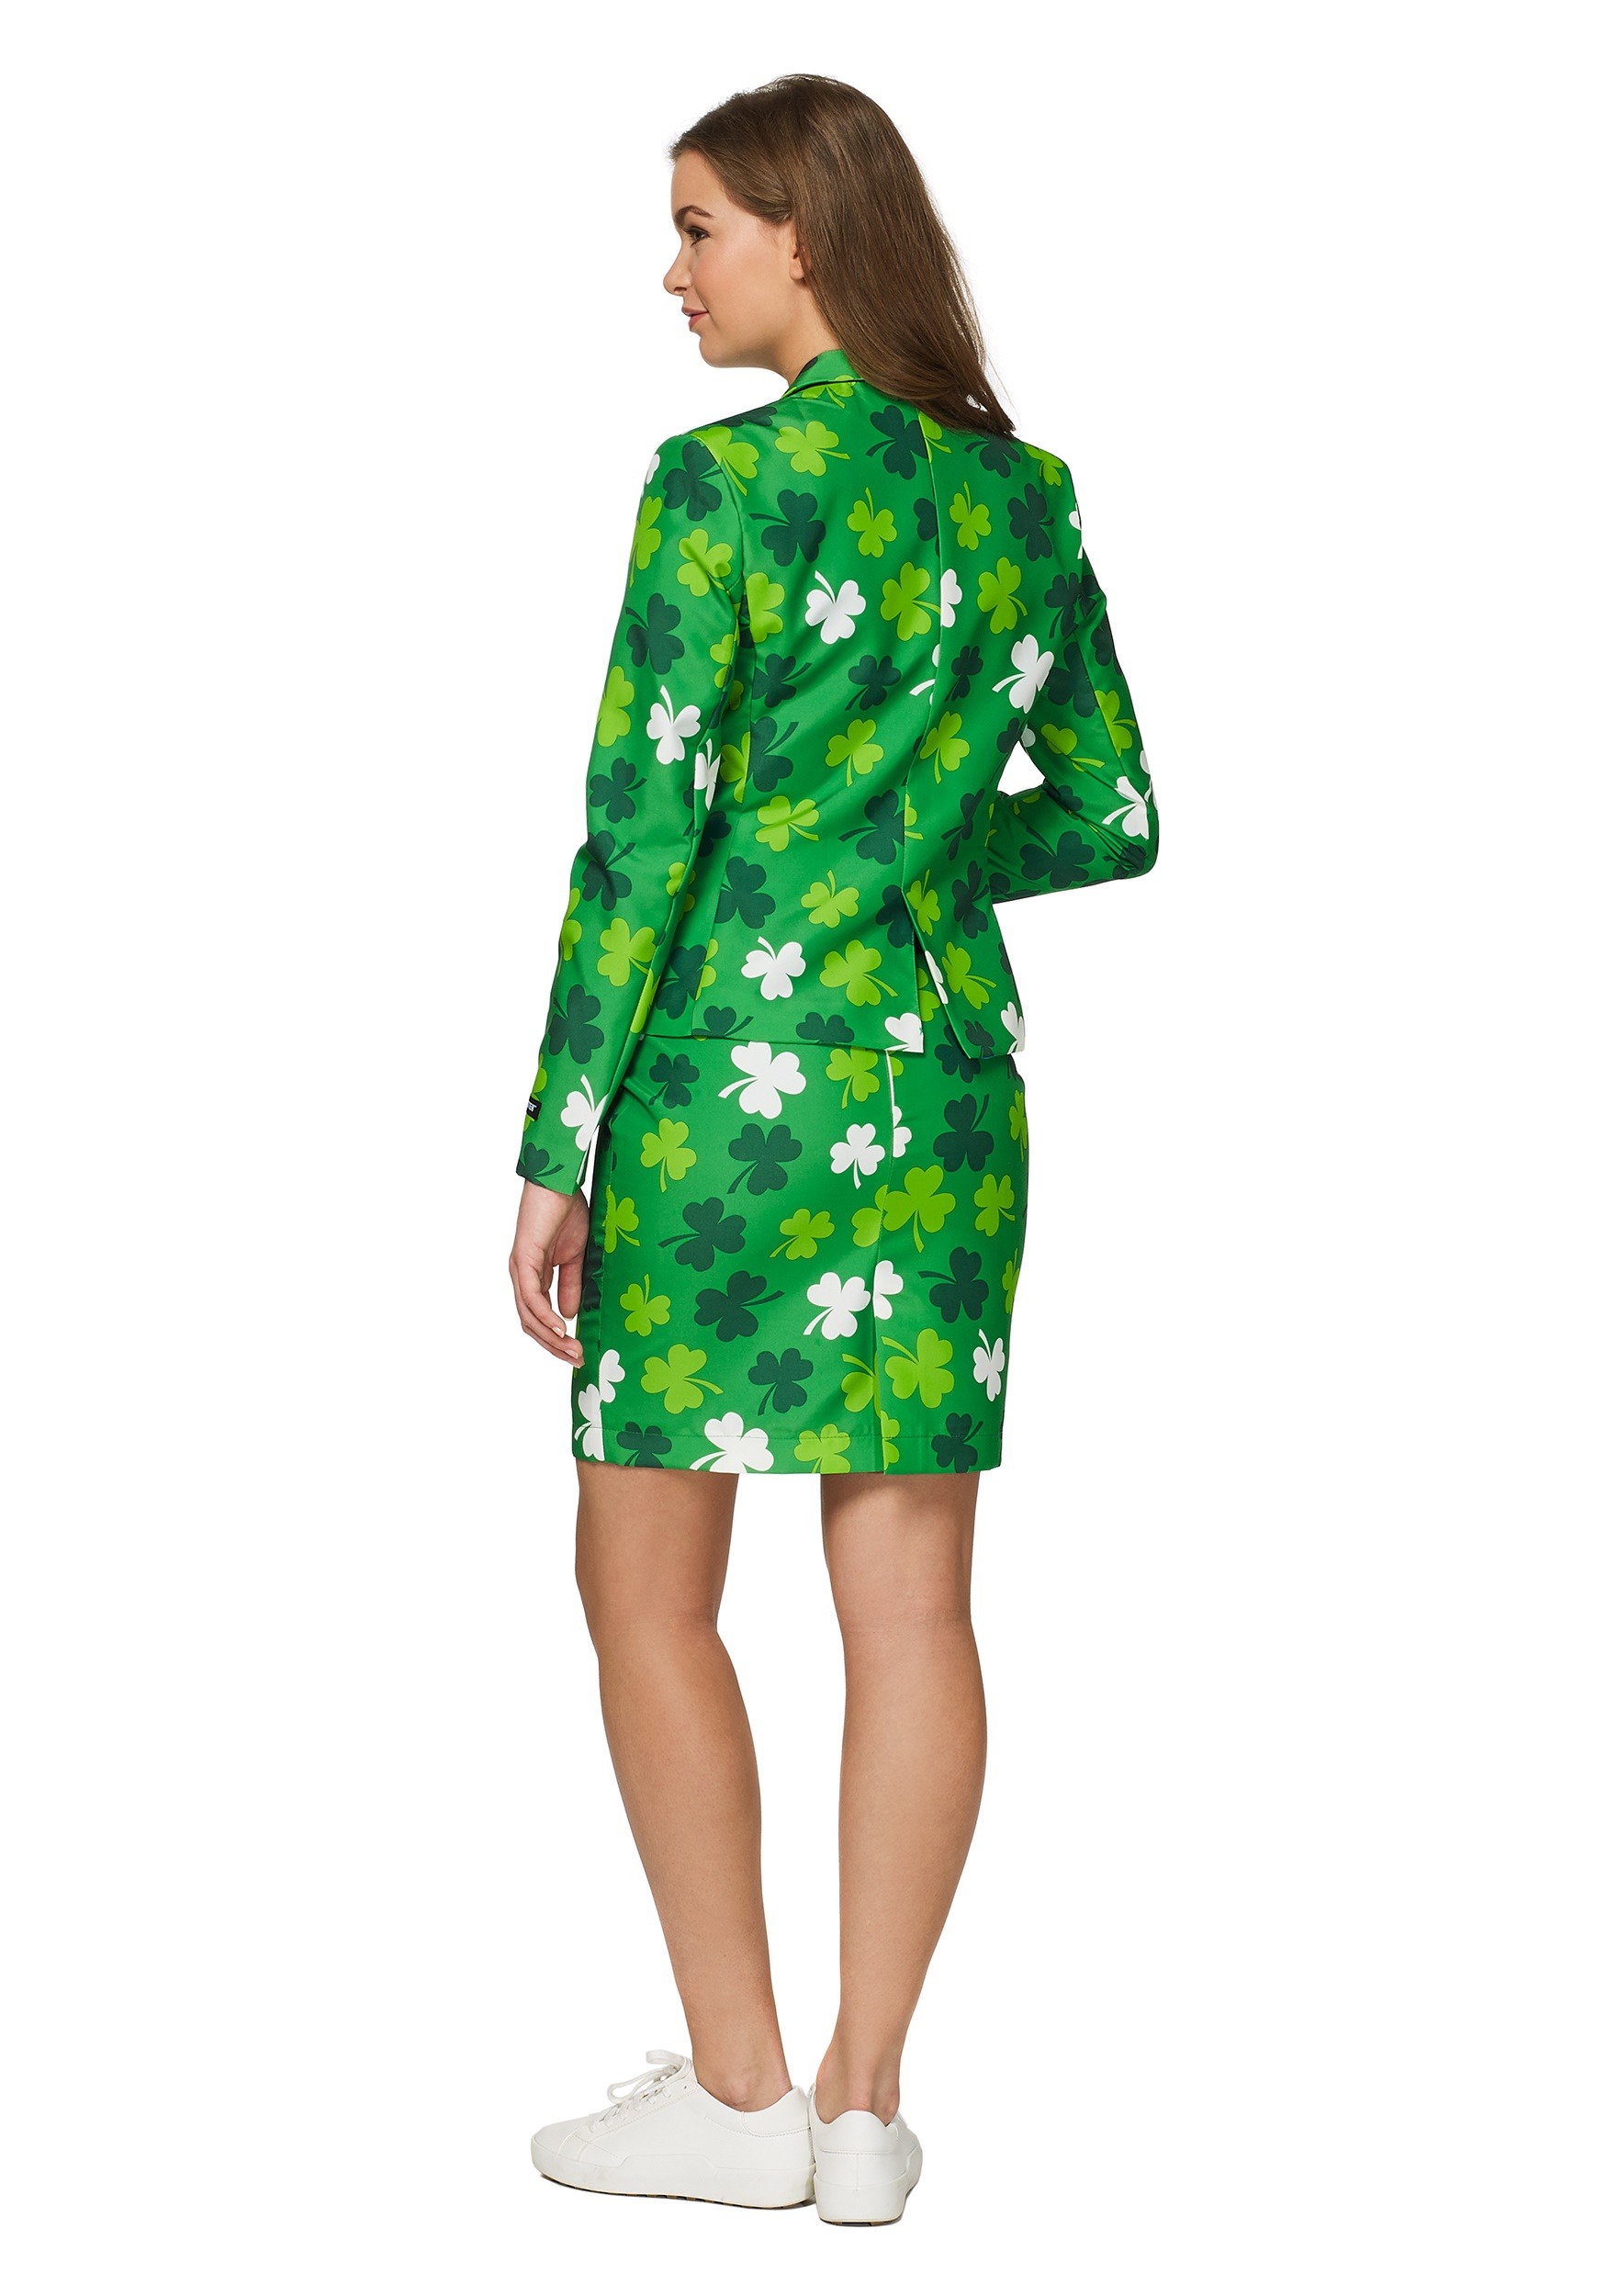 St. Patrick's Day Suitmeister For Women